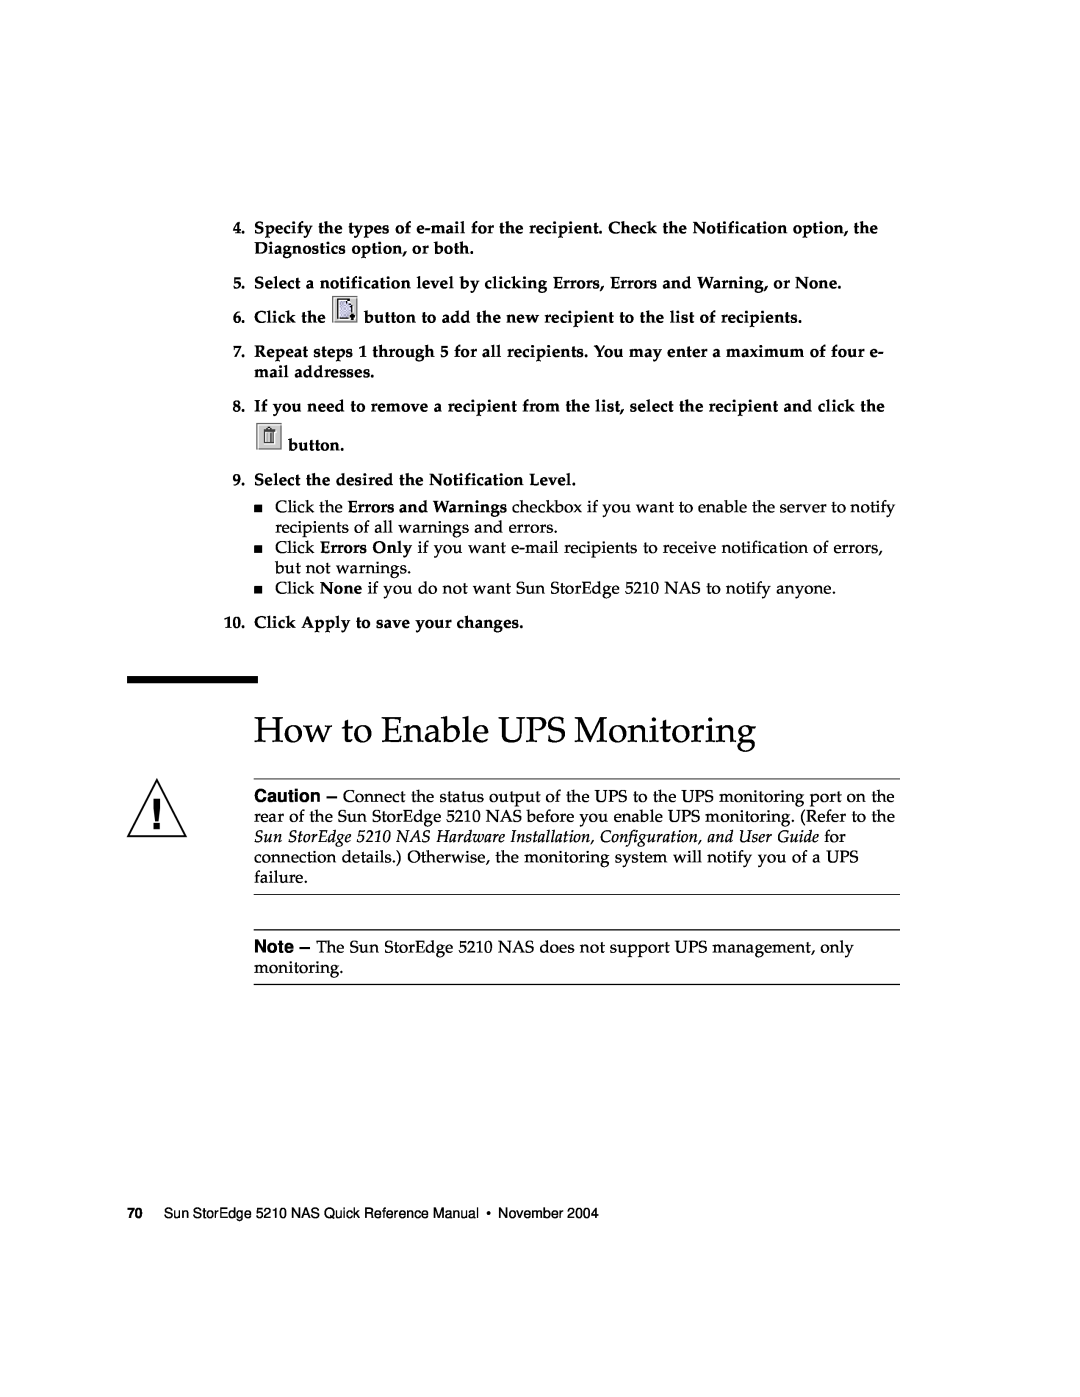 Sun Microsystems 5210 NAS manual How to Enable UPS Monitoring 